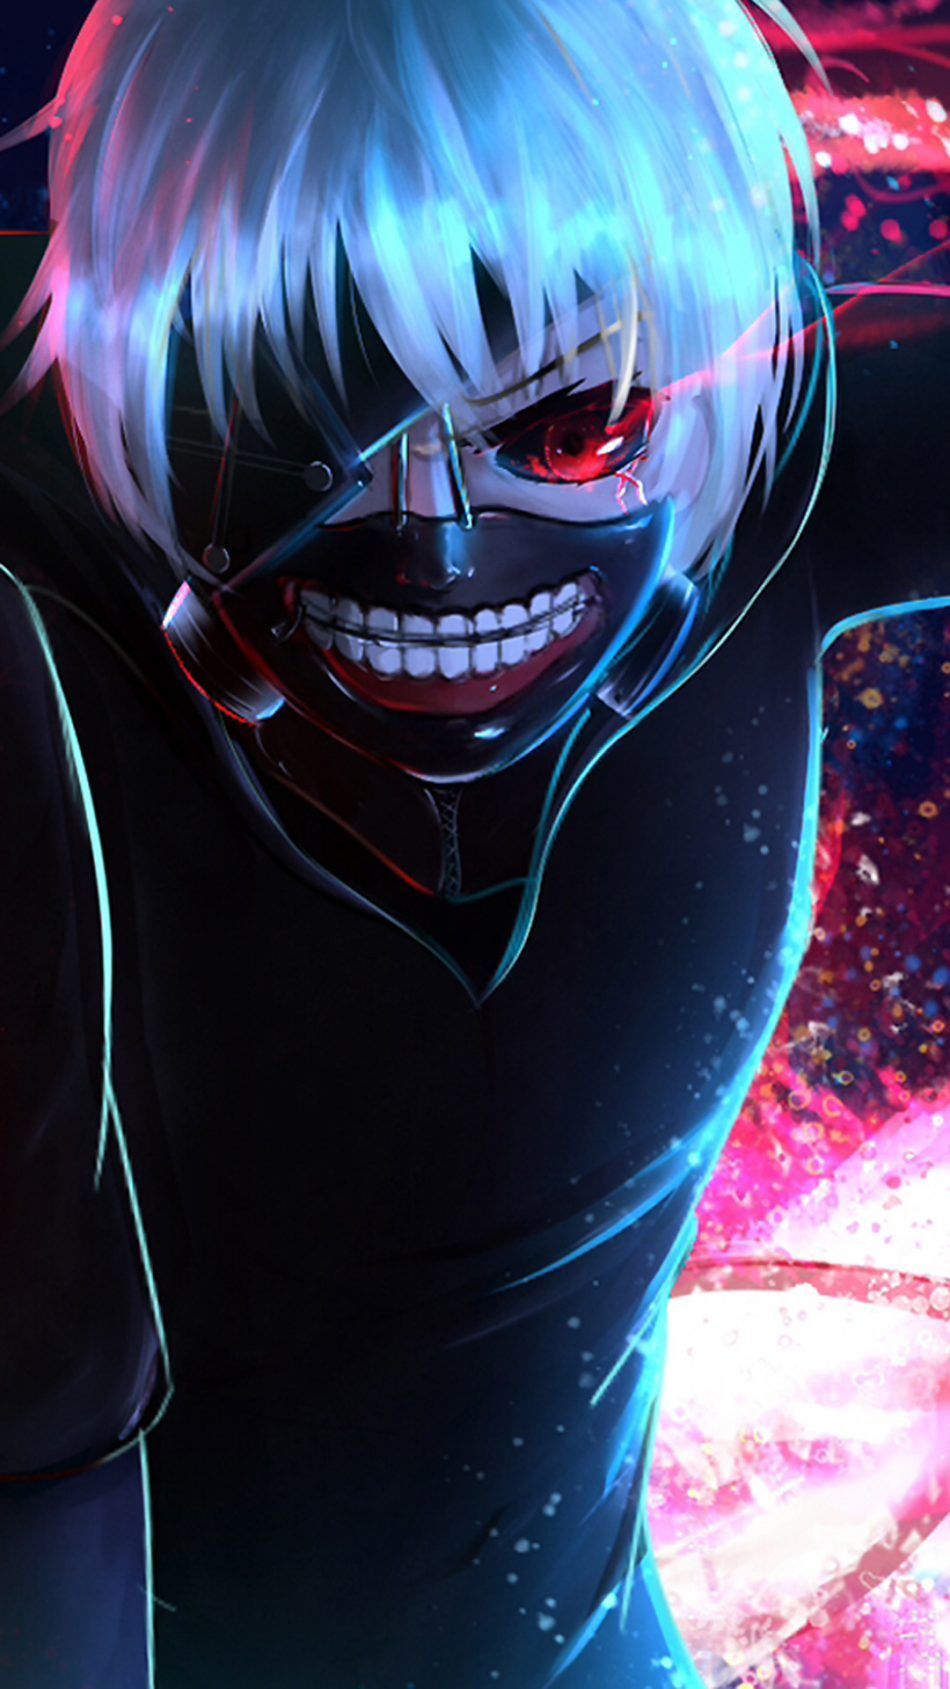 Tokyo Ghoul HD Wallpaper For AndroidD Wallpaper. Wallpaper anime, Gambar anime, Tokyo ghoul